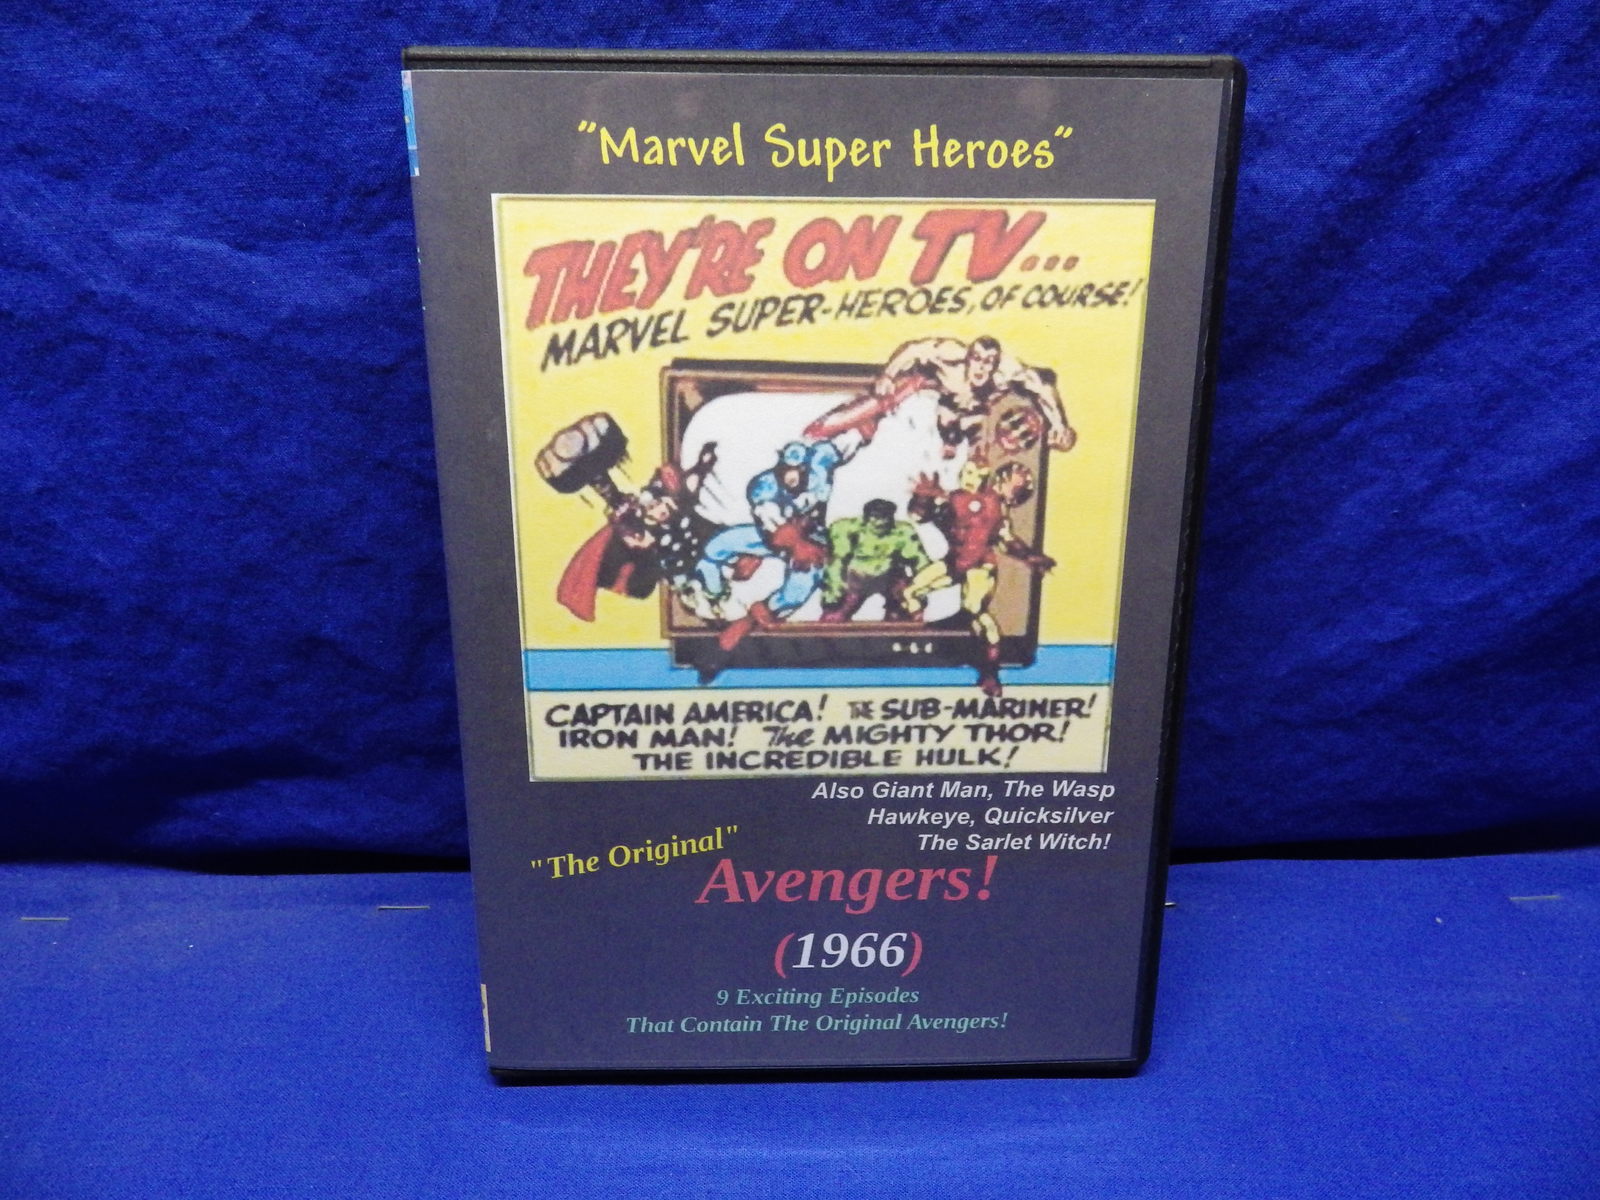 Primary image for 1966 Marvel Super Heroes TV Series The Original Avengers 9 Episodes DVD